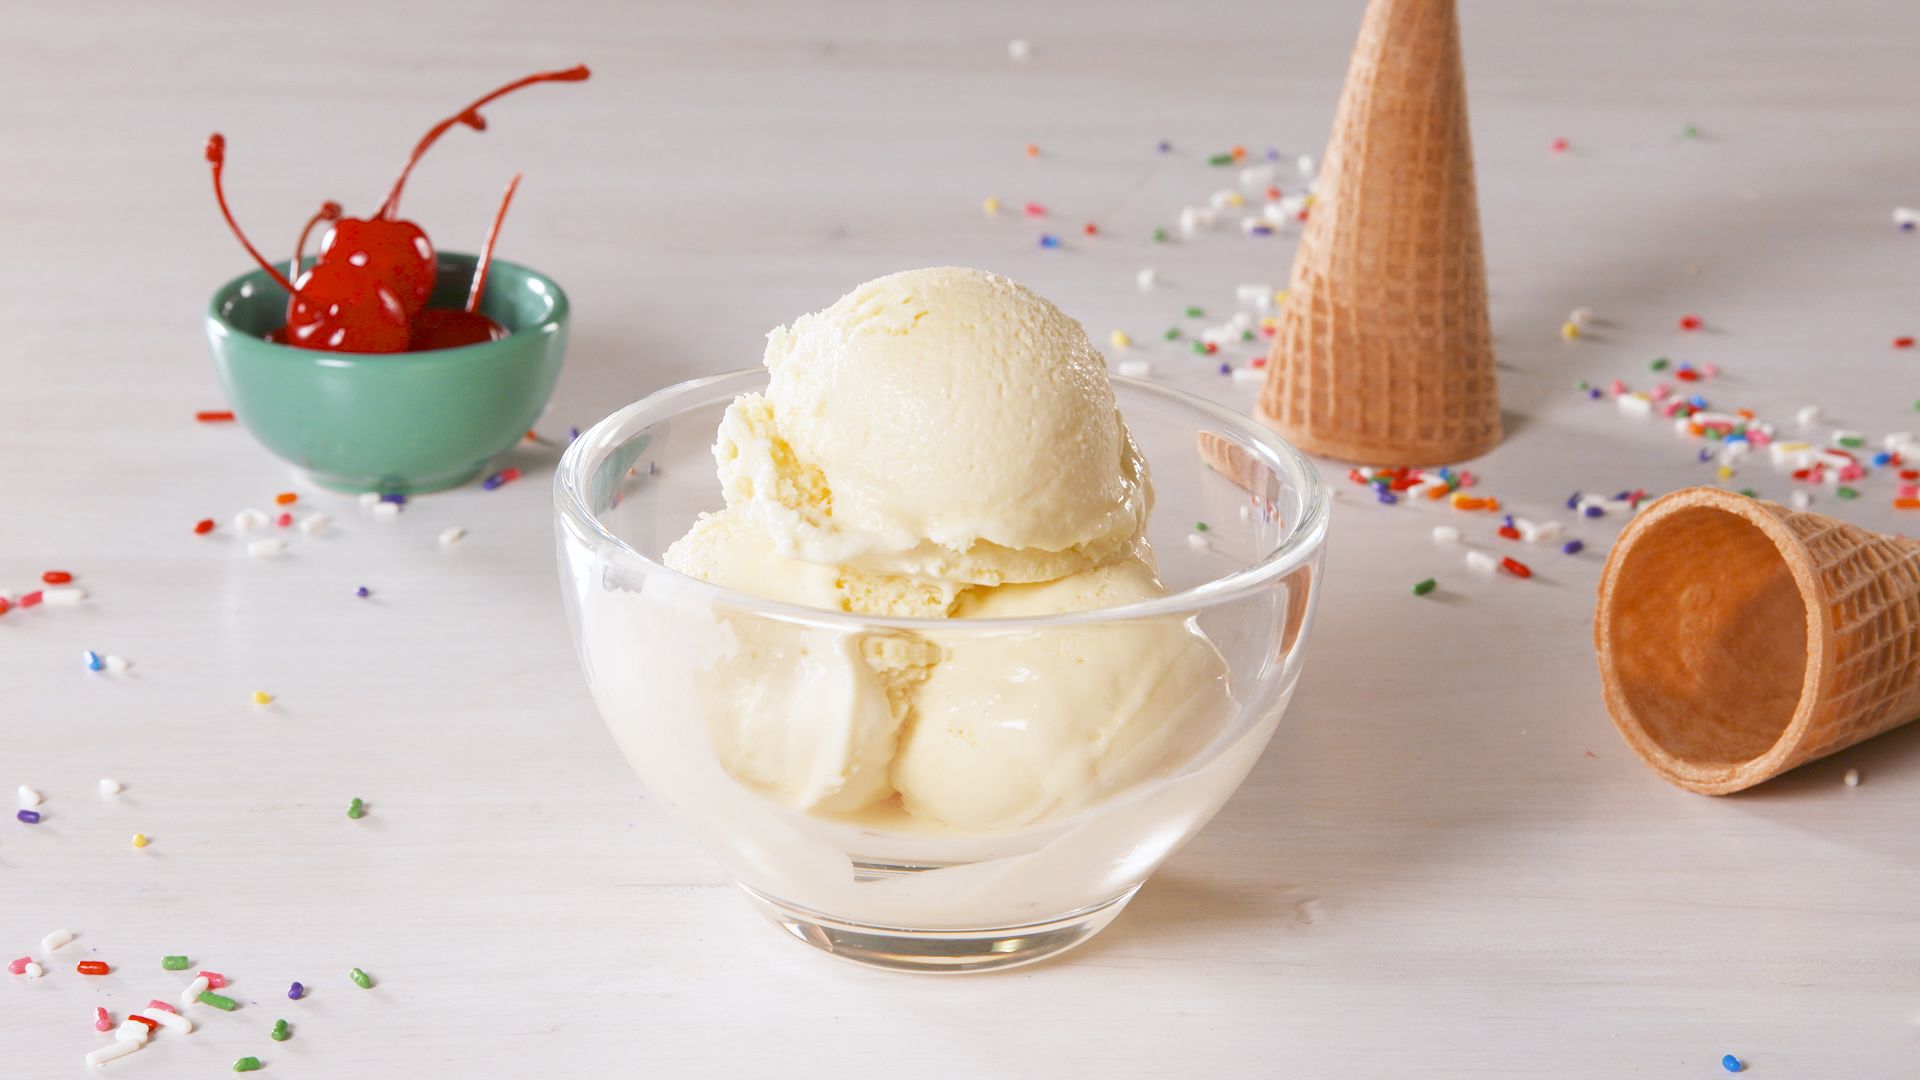 How to Make Homemade Ice Cream: The F&W Guide